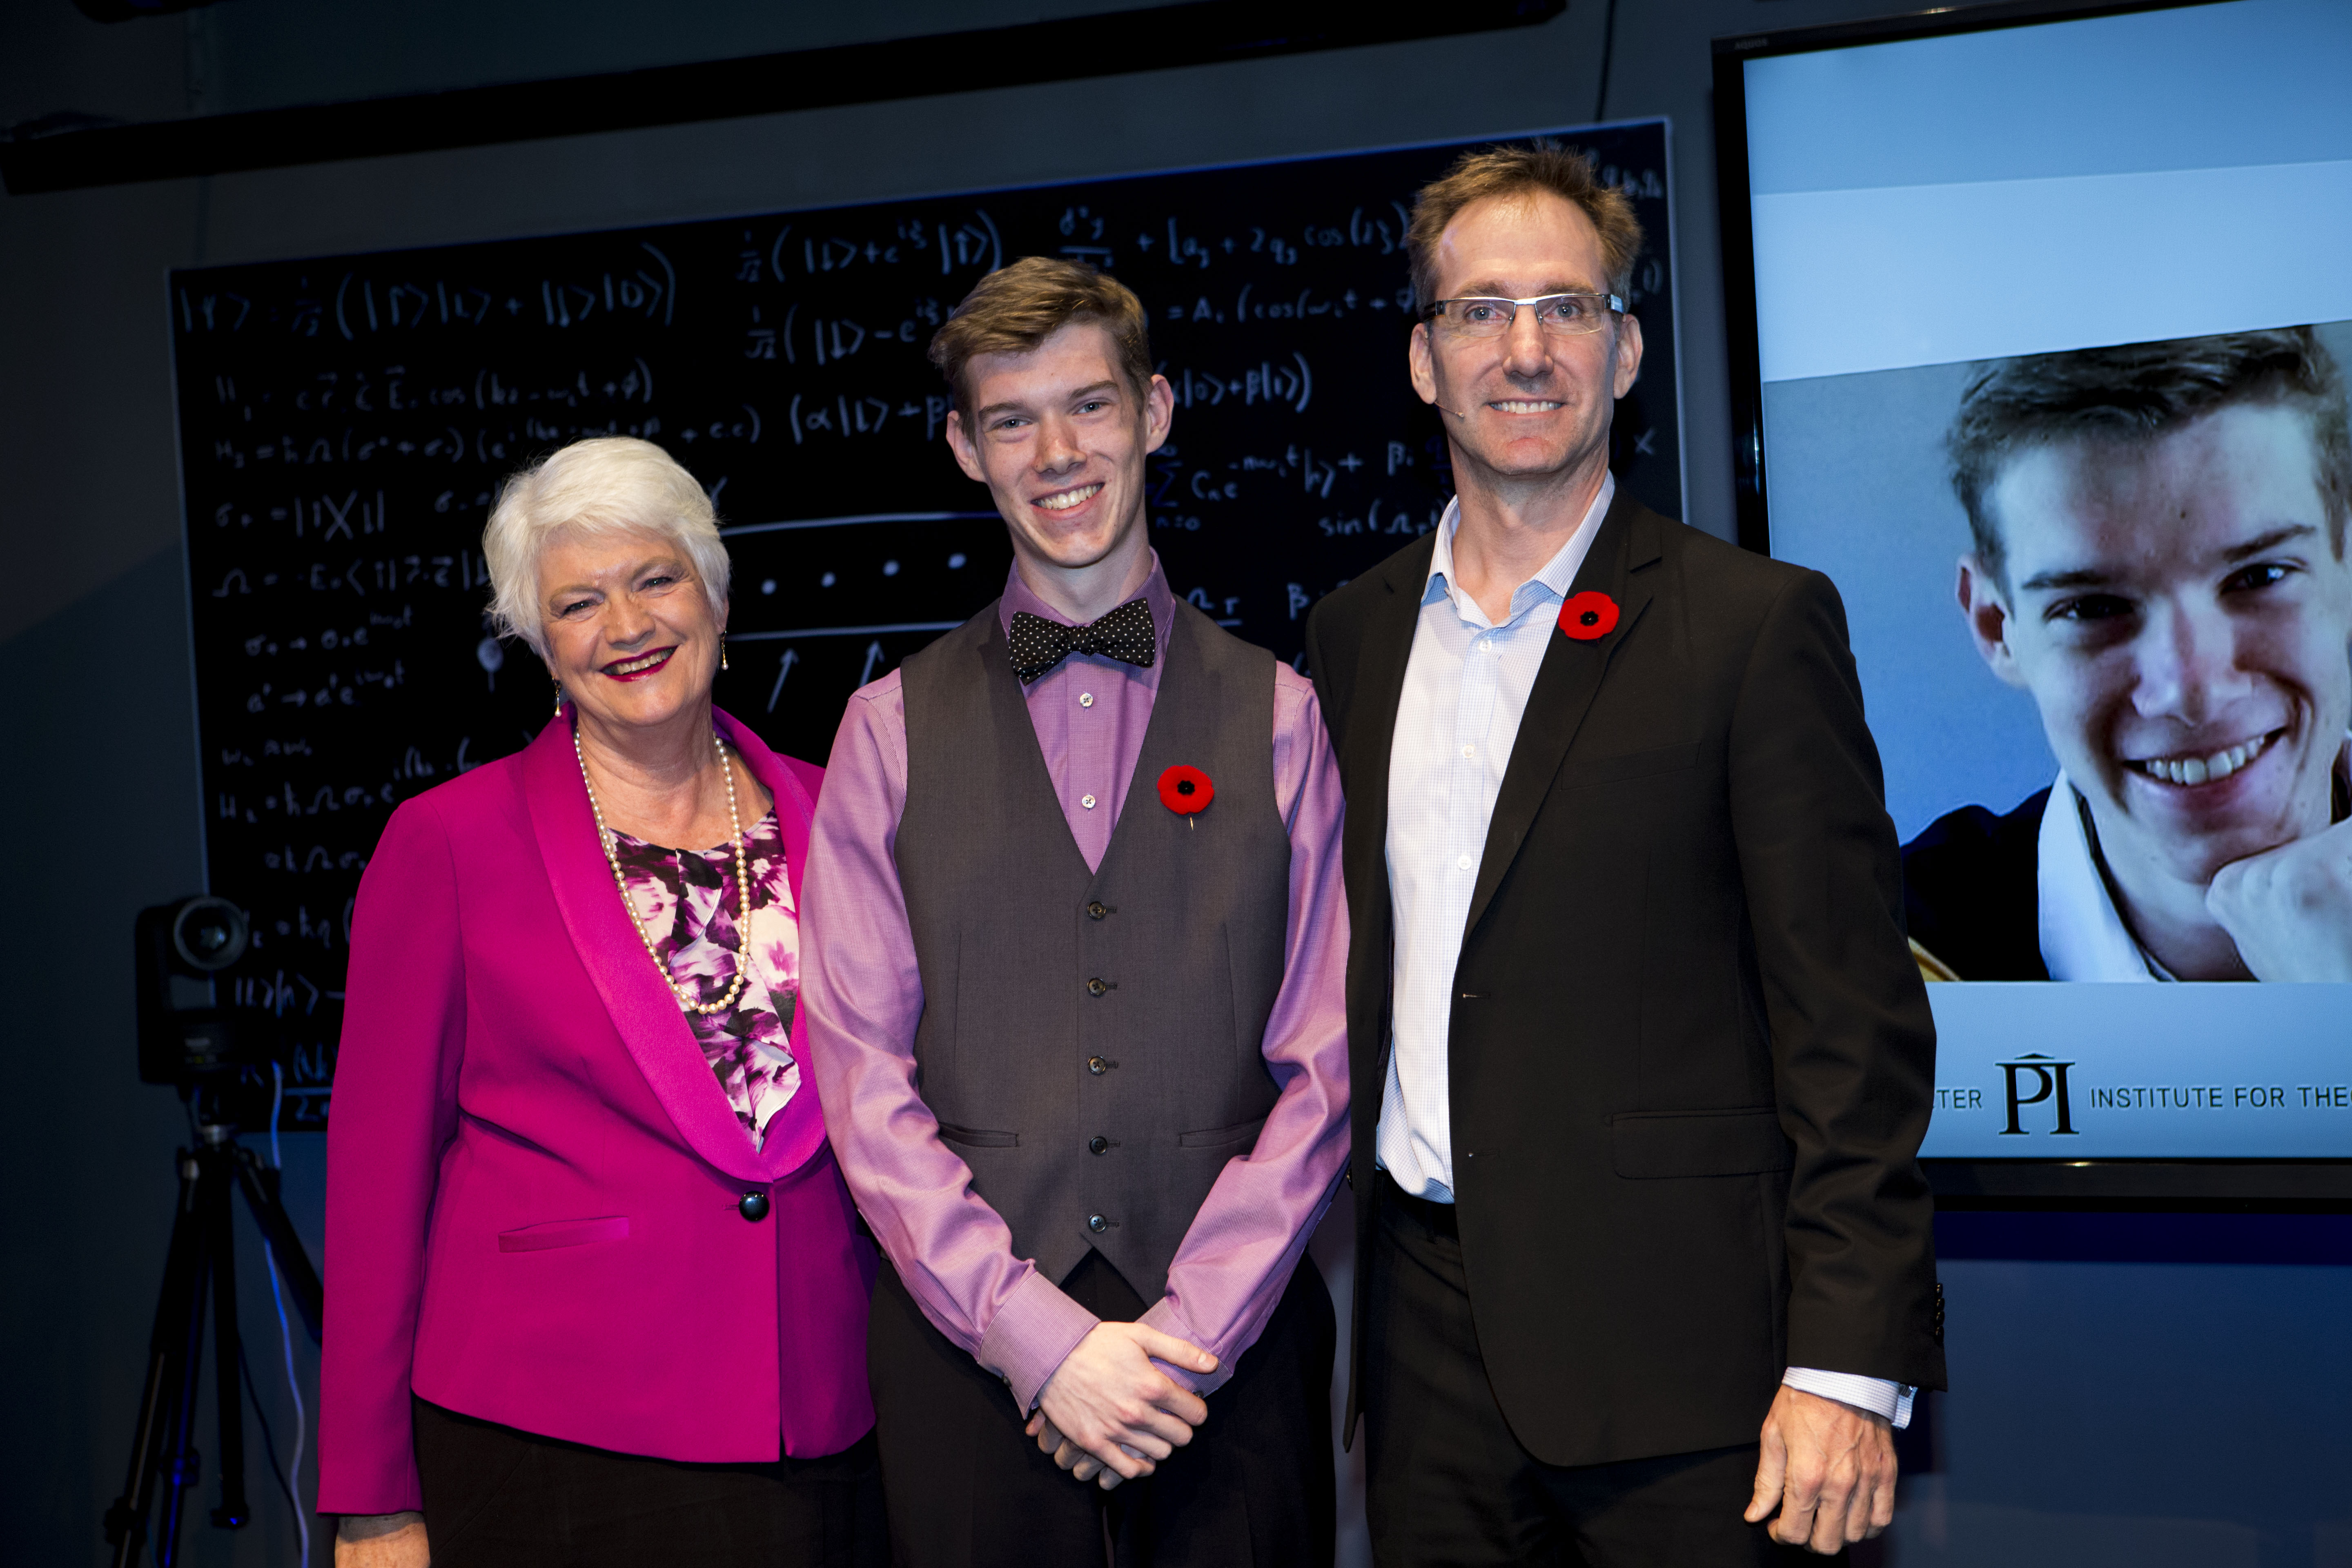 Sean Begy, recipient of the Luke-Santi Memorial award, posing with with Ontario Minister of Education Liz Sandals and Perimeter Outreach Director Greg Dick.